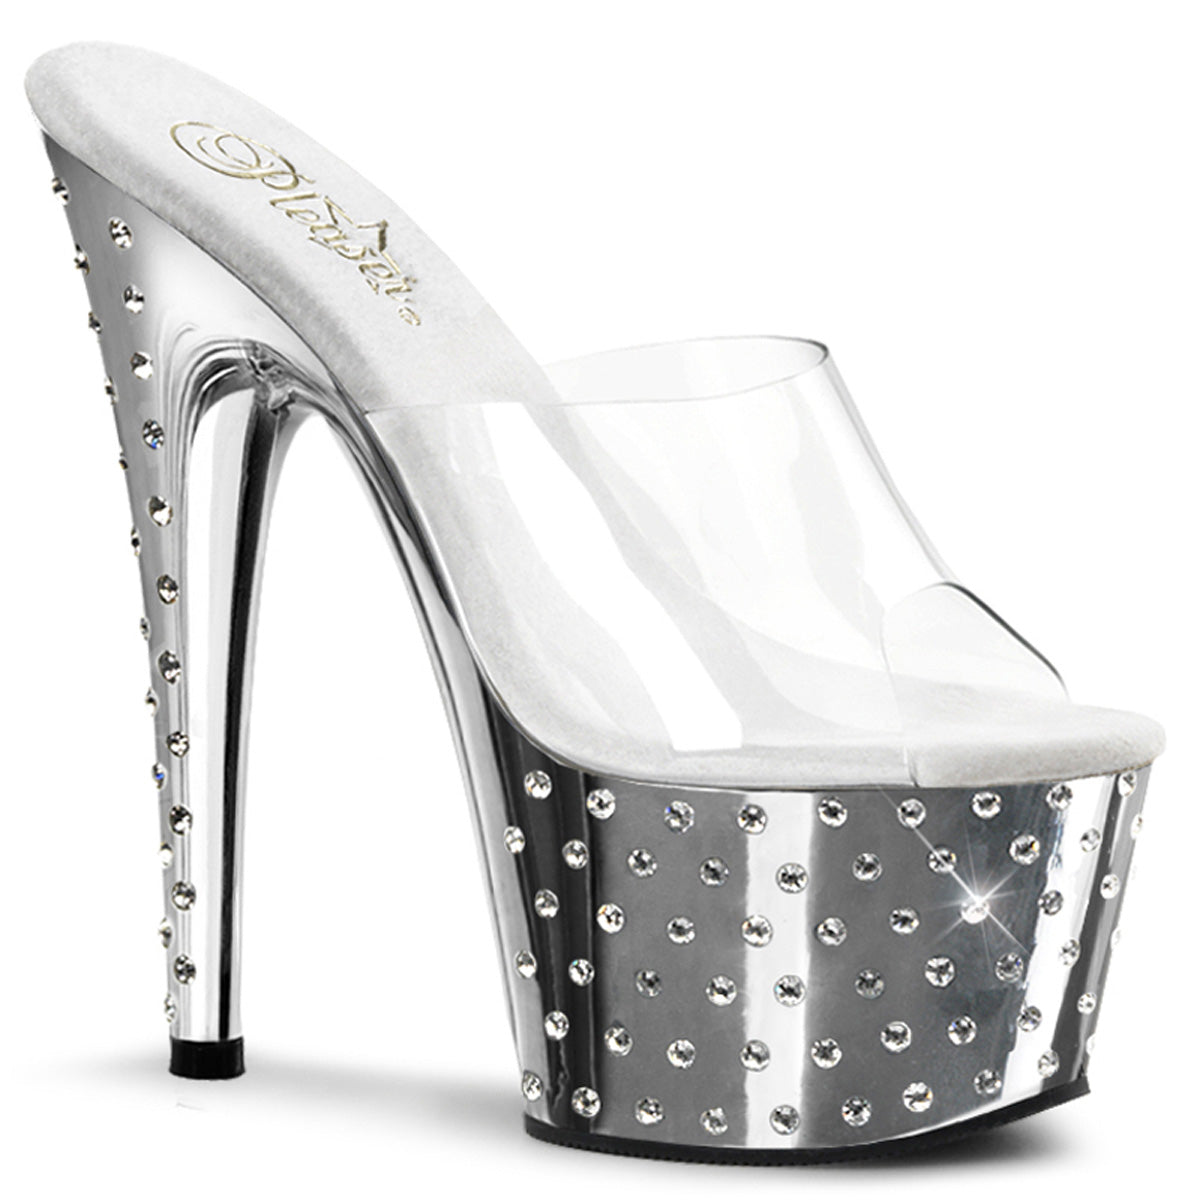 STARDUST-701 7 Inch Heel ClearSilver Chrome Strippers Shoes-Pleaser- Sexy Shoes